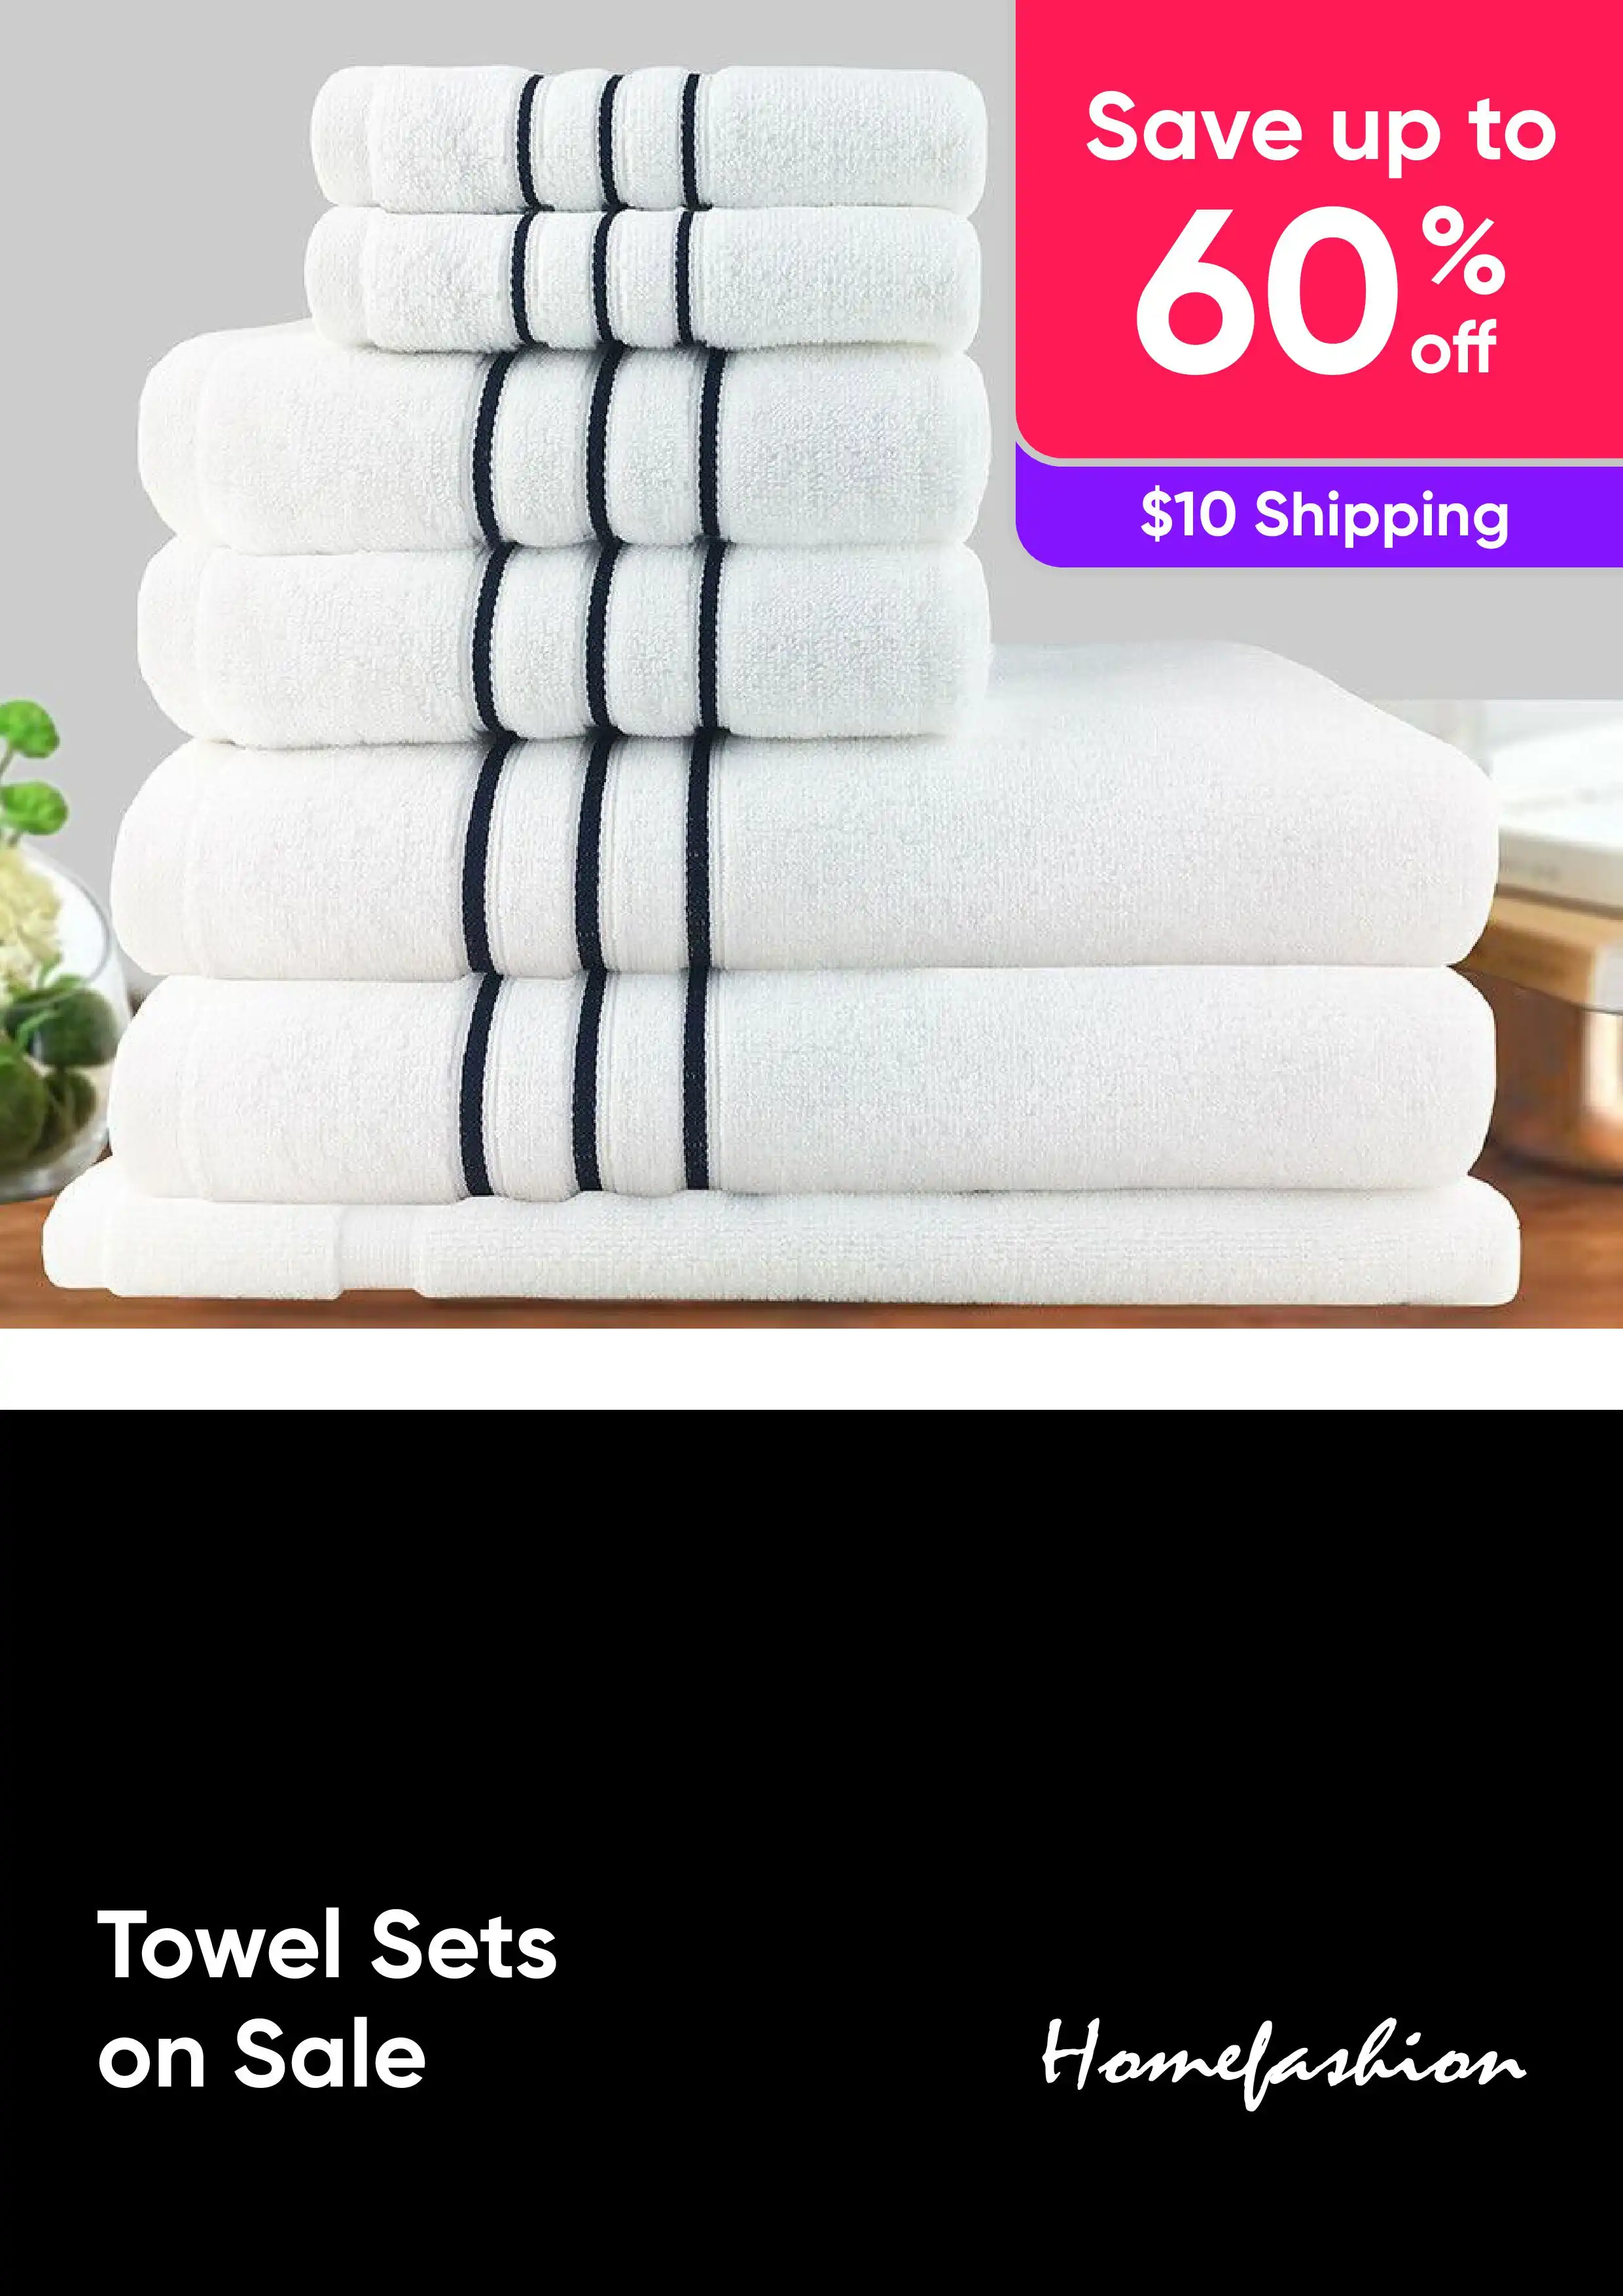 Shop Deals on Towel Sets - Save Up to 60% off Luxurious Towels